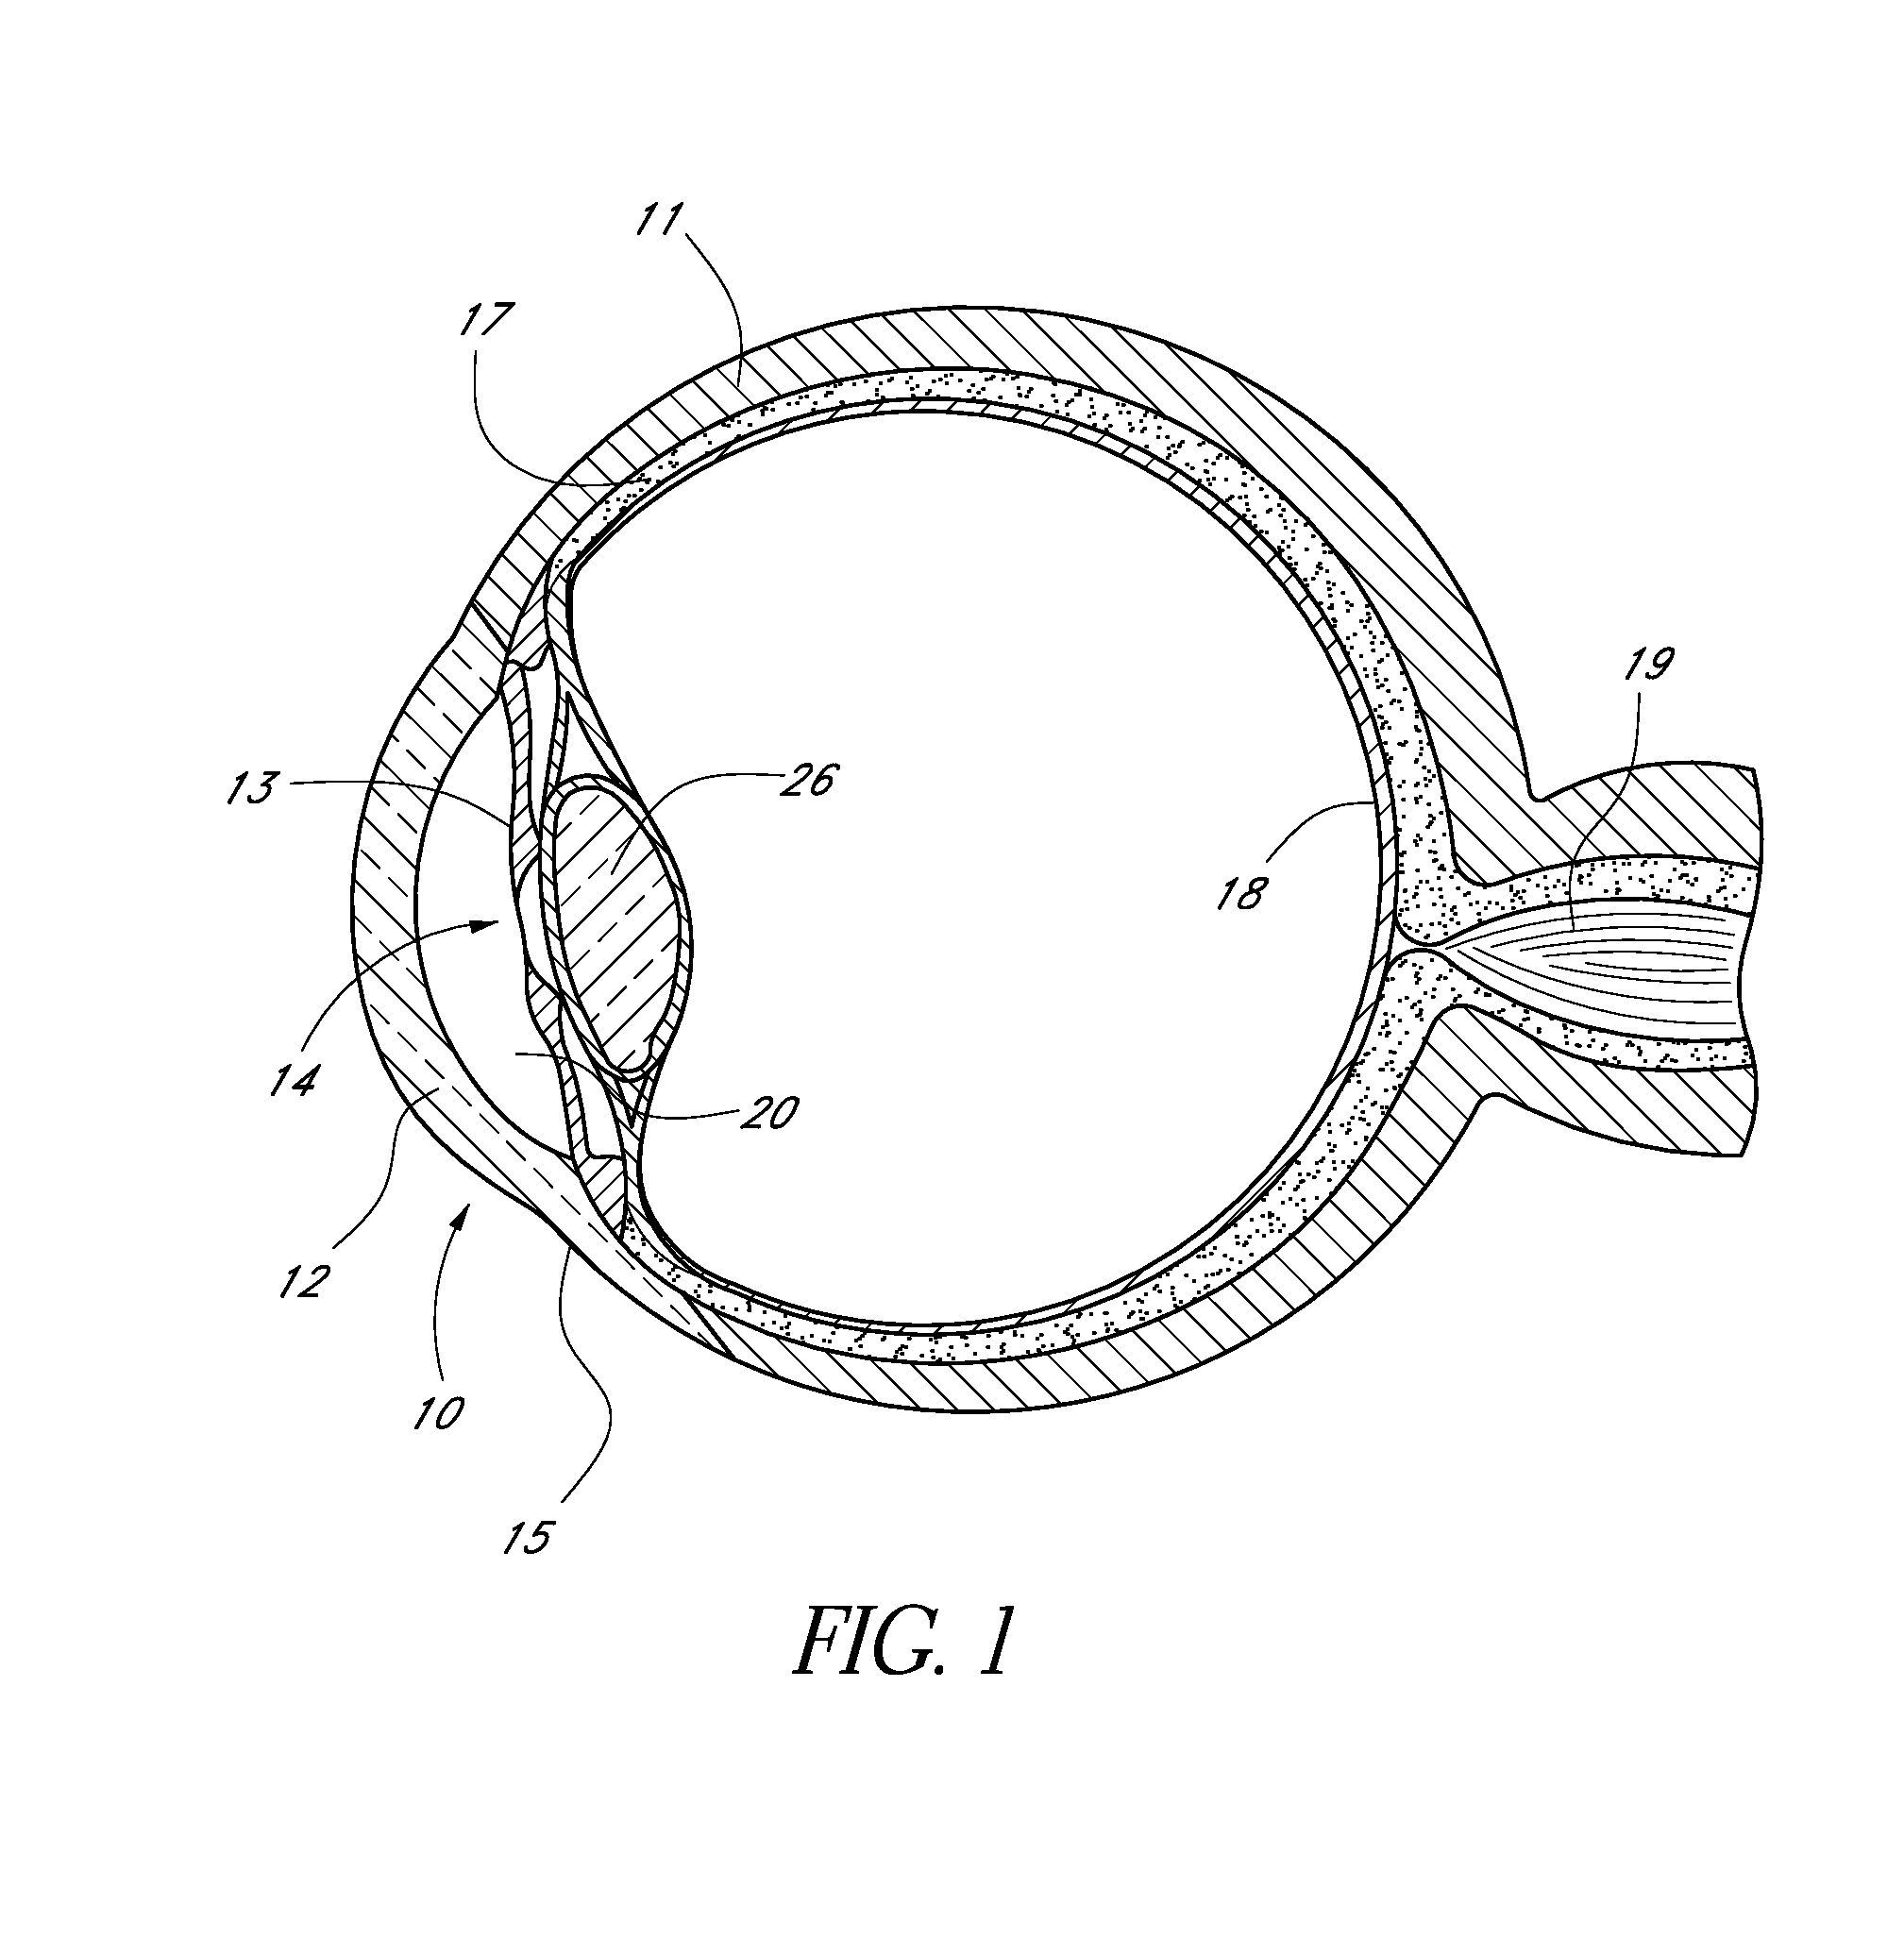 Ocular disorder treatment implants with multiple opening